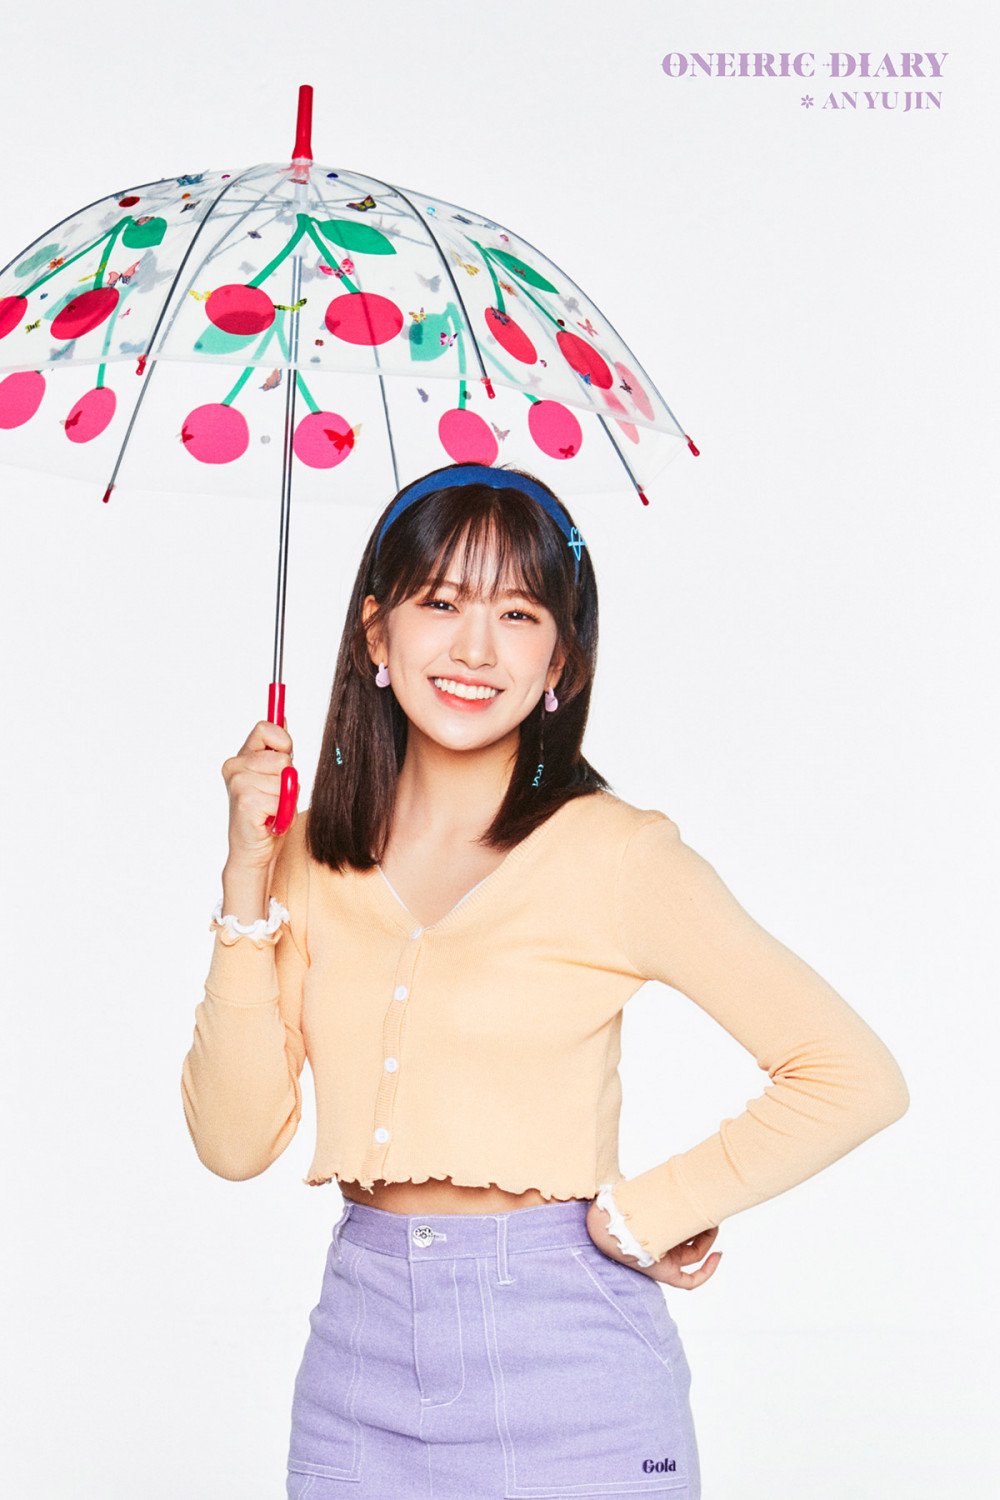 izone-release-lovely-first-set-of-oneiric-diary-concept-photos-11